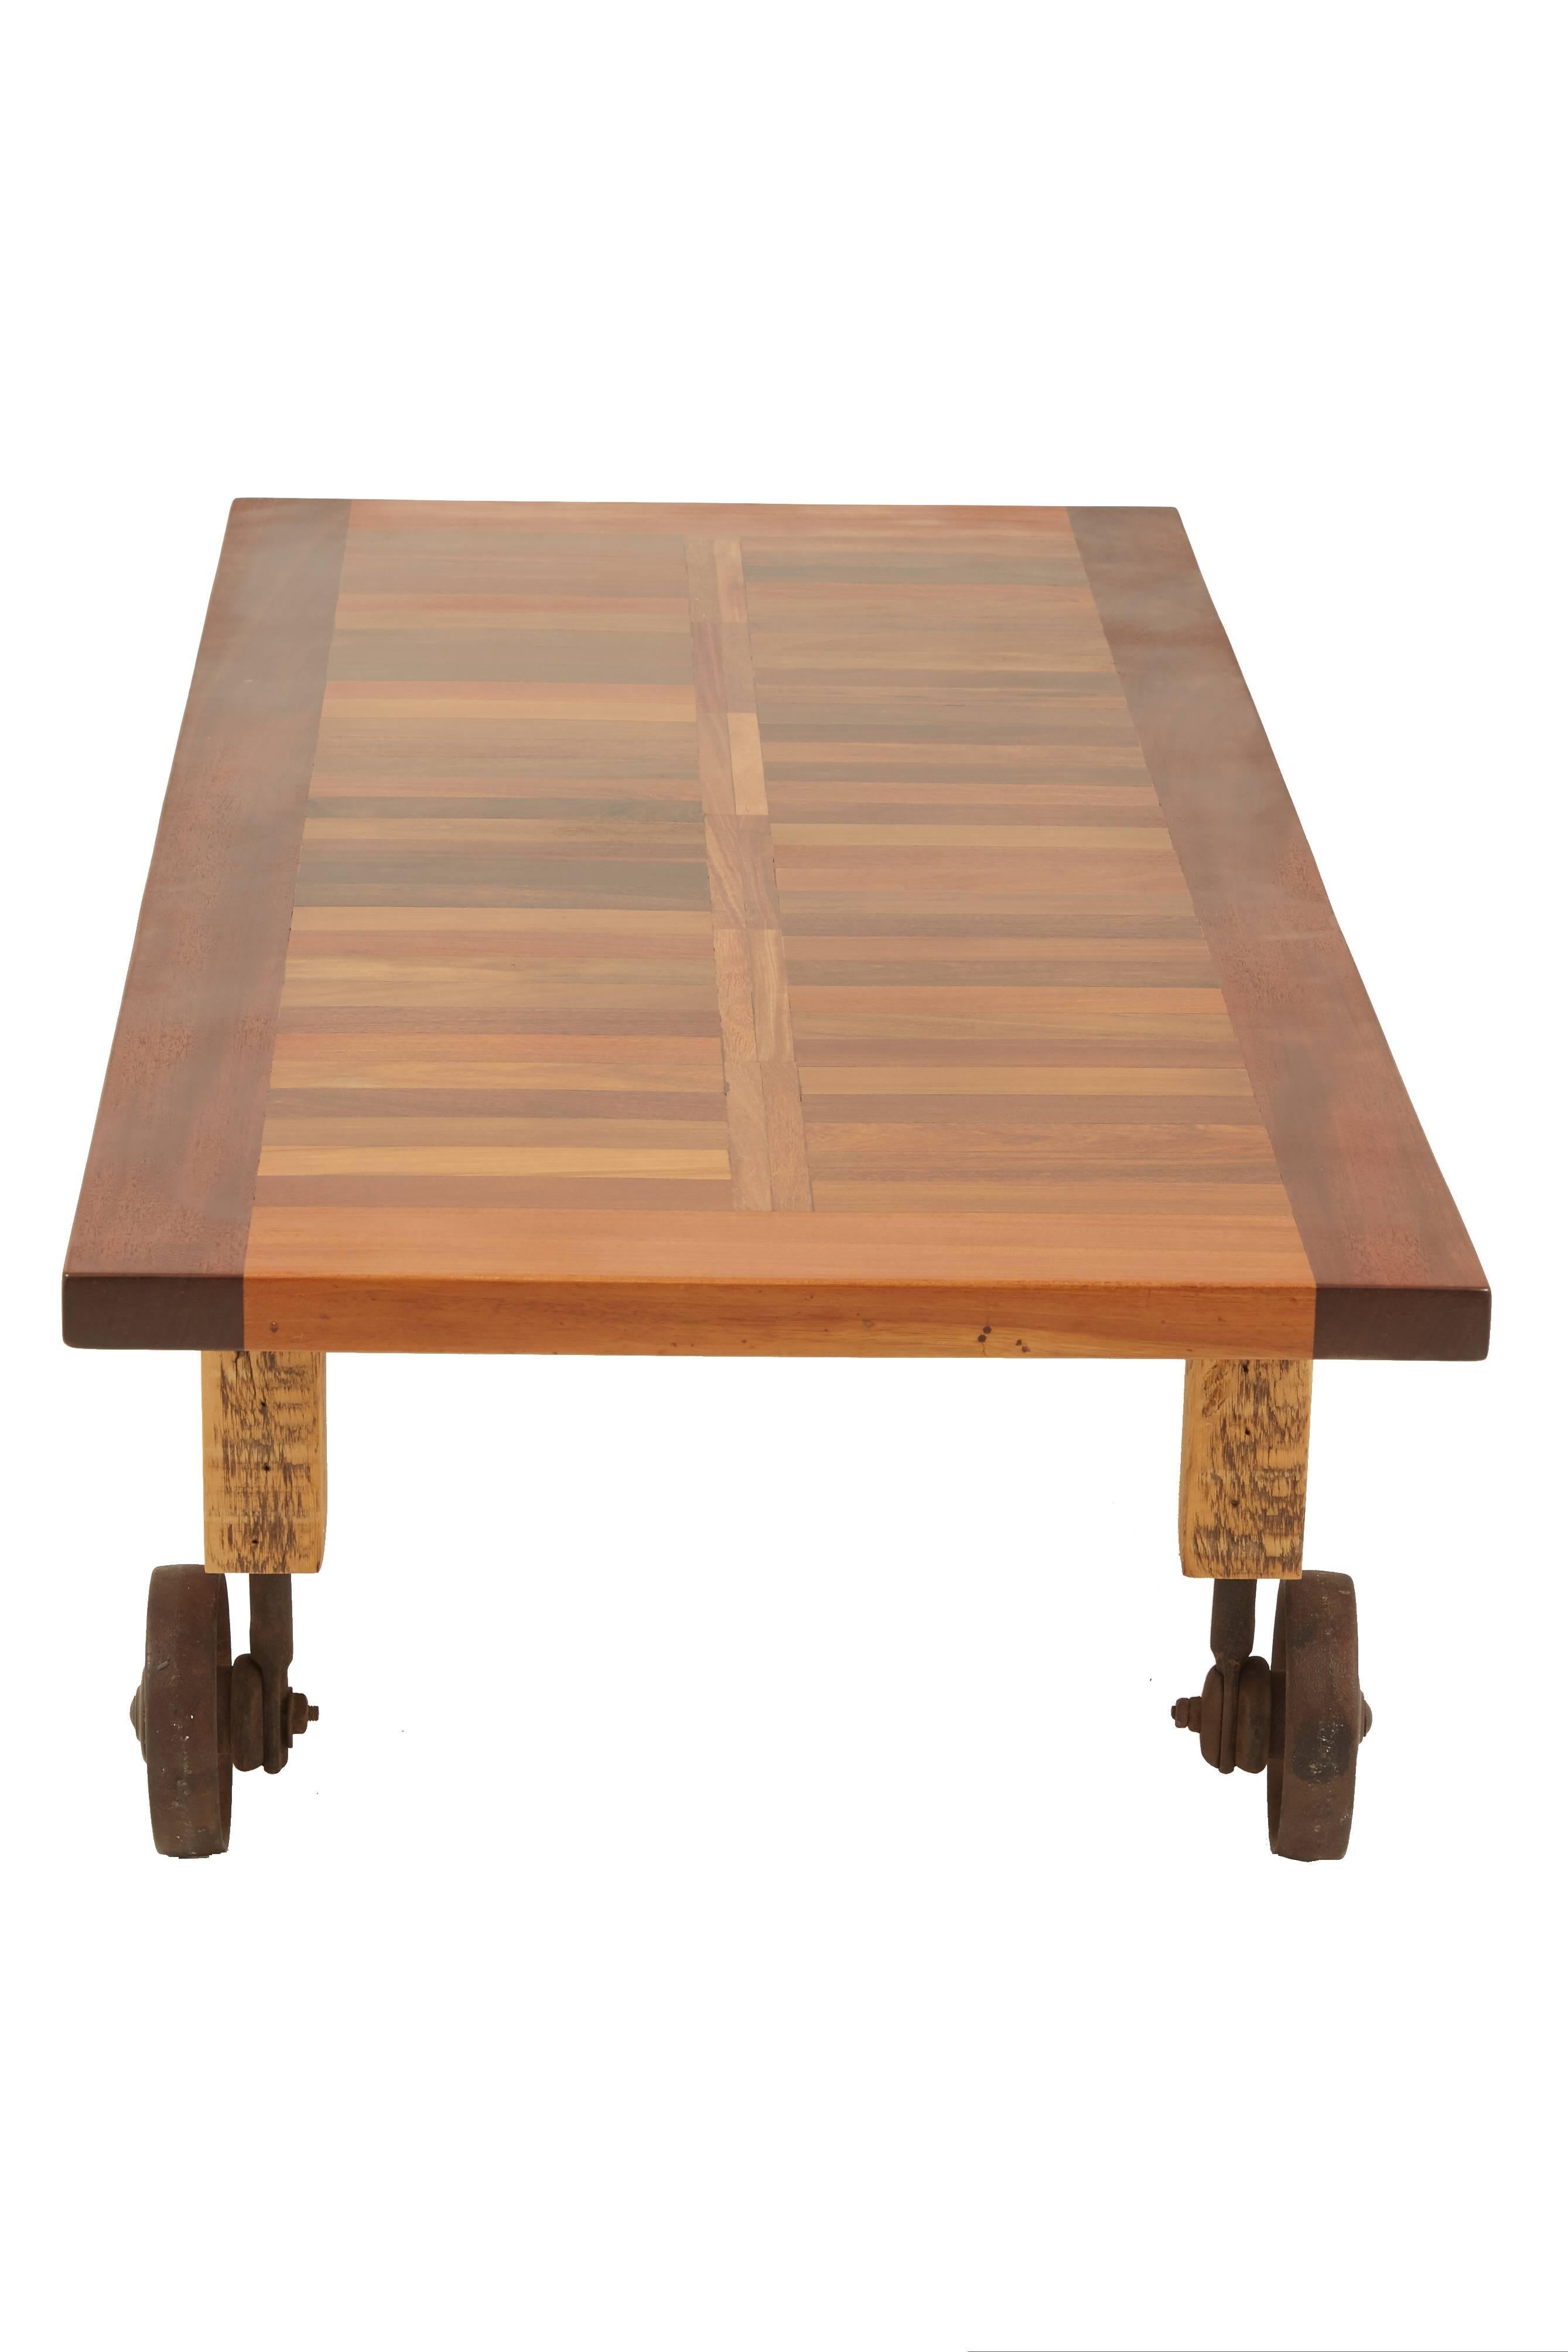 American Handmade Coffee Table Made from Reclaimed Mahogany Door by Mats Christeen For Sale